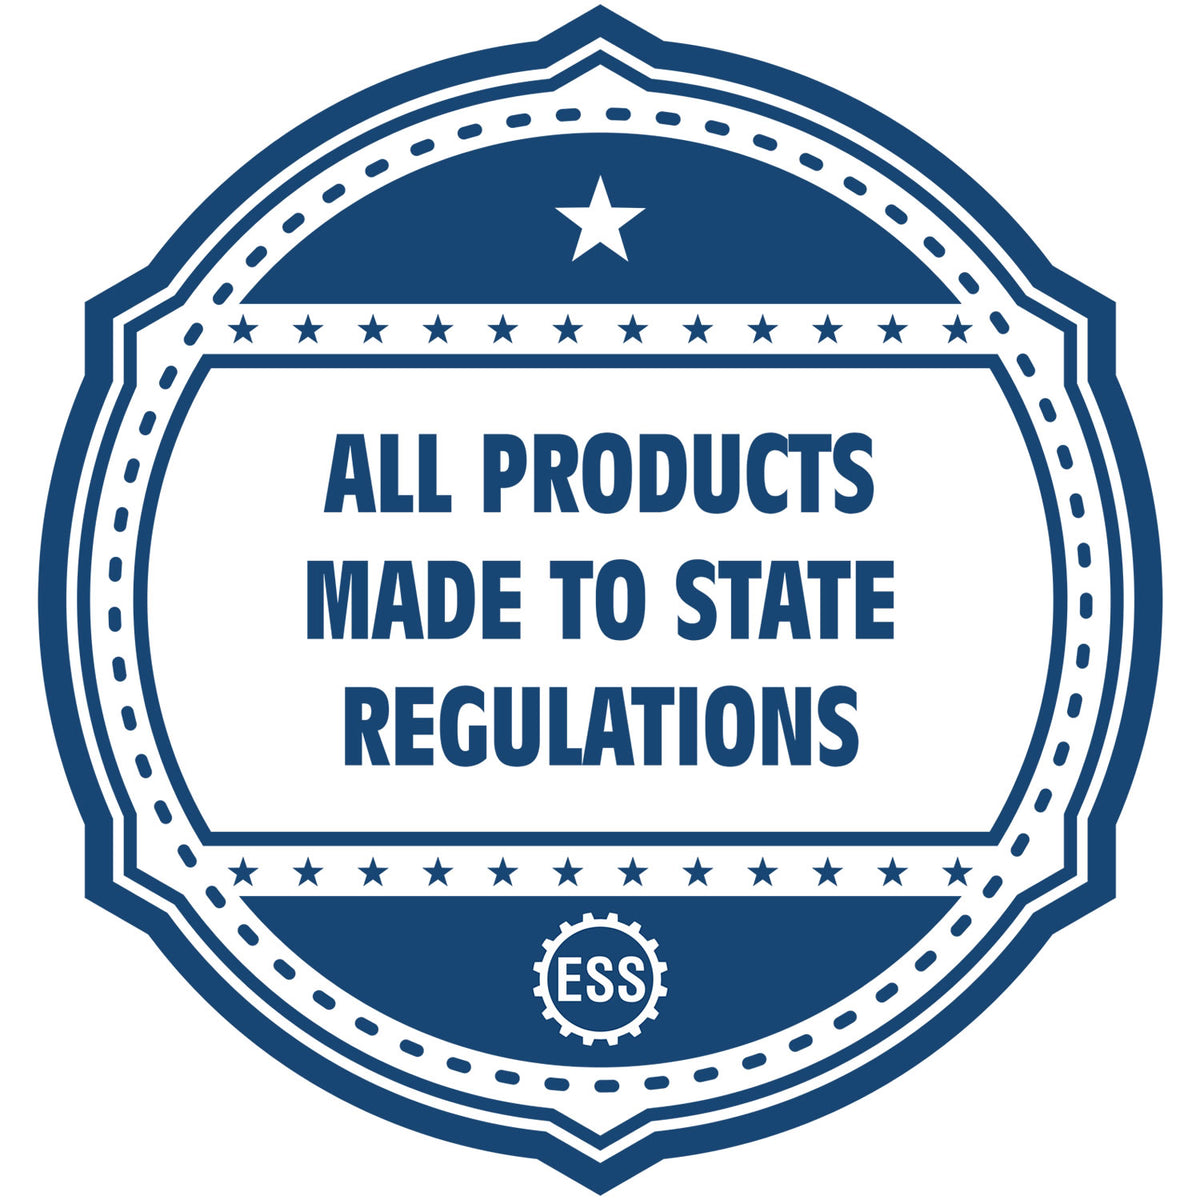 An icon or badge element for the Heavy-Duty Oregon Rectangular Notary Stamp showing that this product is made in compliance with state regulations.